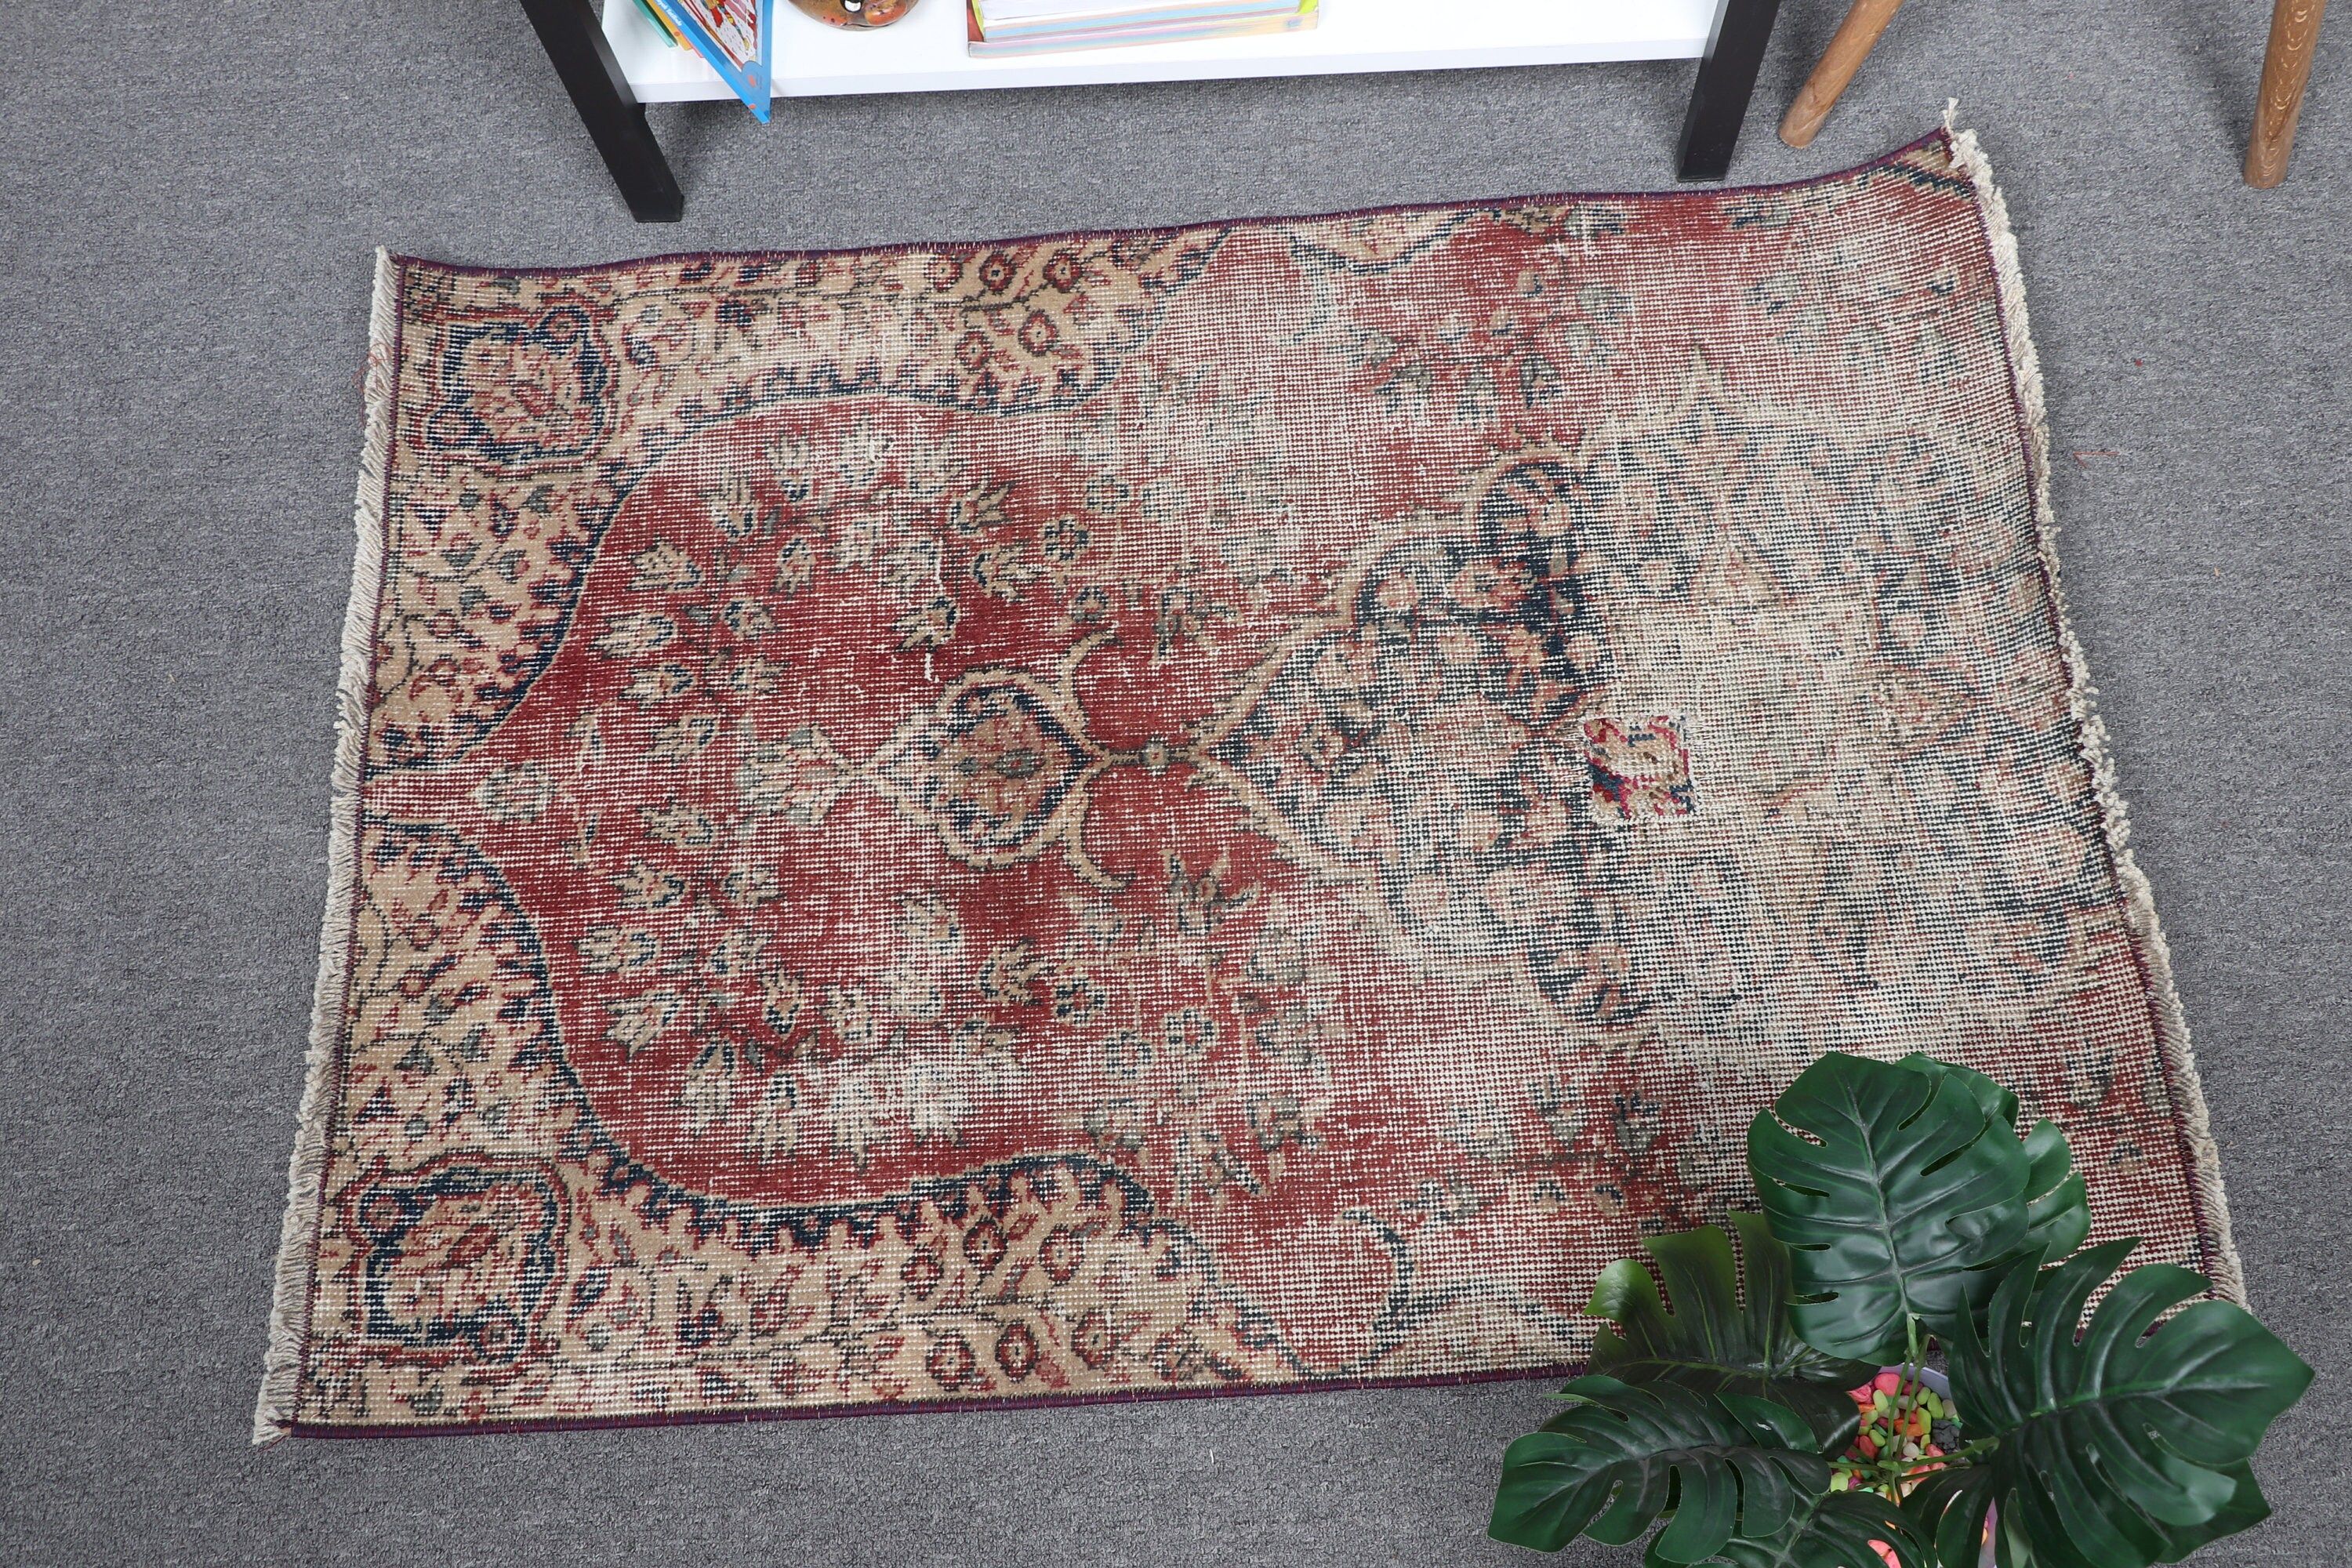 Antique Rug, Car Mat Rugs, Vintage Rug, Turkish Rugs, Anatolian Rug, 2.4x3.4 ft Small Rug, Bedroom Rugs, Red Anatolian Rug, Eclectic Rugs